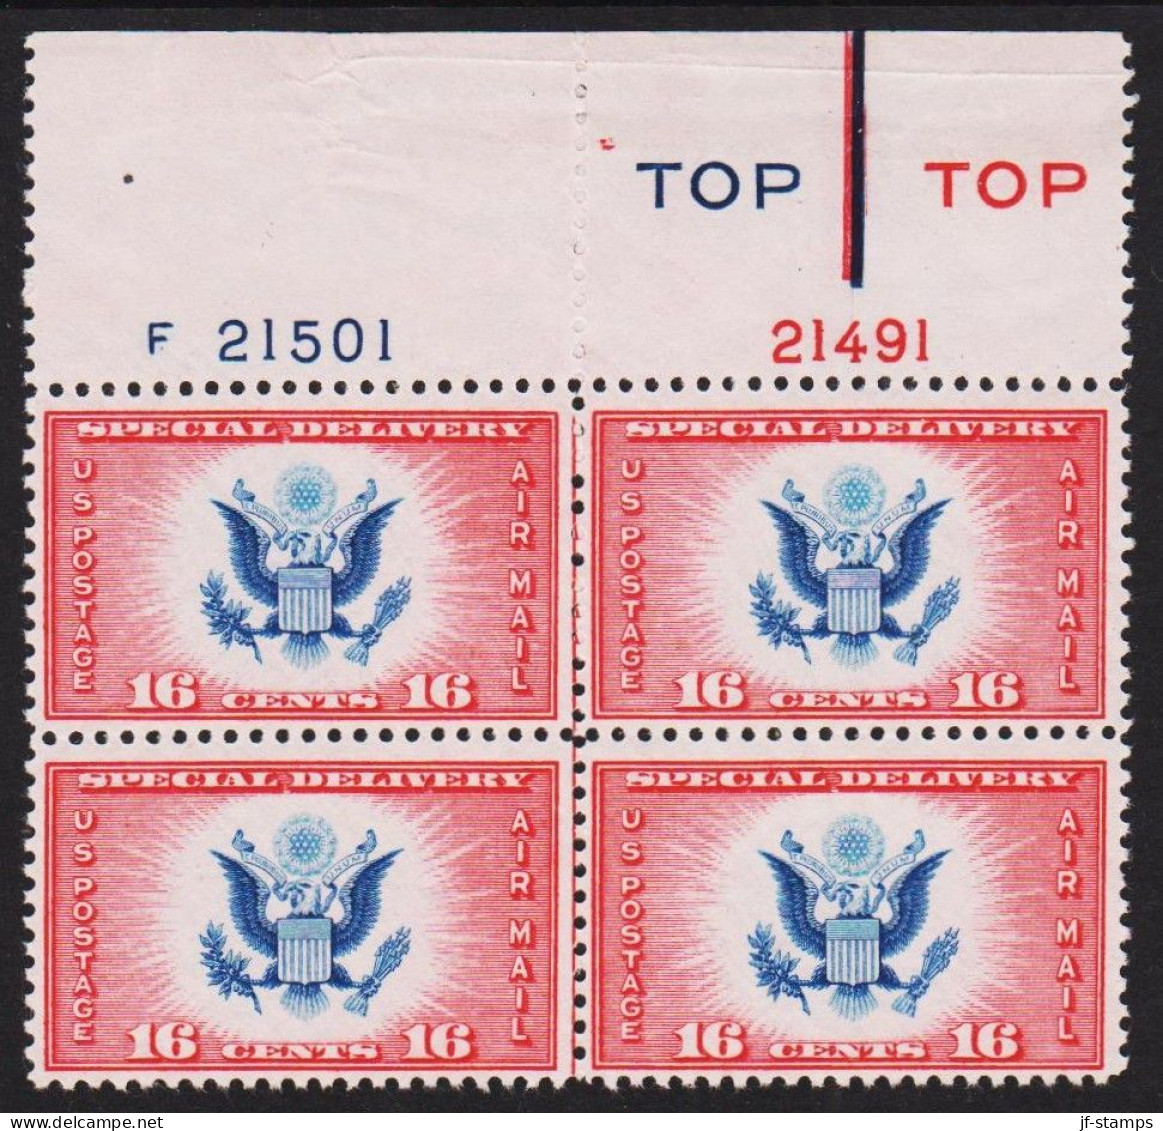 1936. USA. SPECIAL DELIVERY 16 CENTS 16. AIR MAIL, 4block Never Hinged.  Platenumber 21501 And 21491.  - JF542824 - Unused Stamps